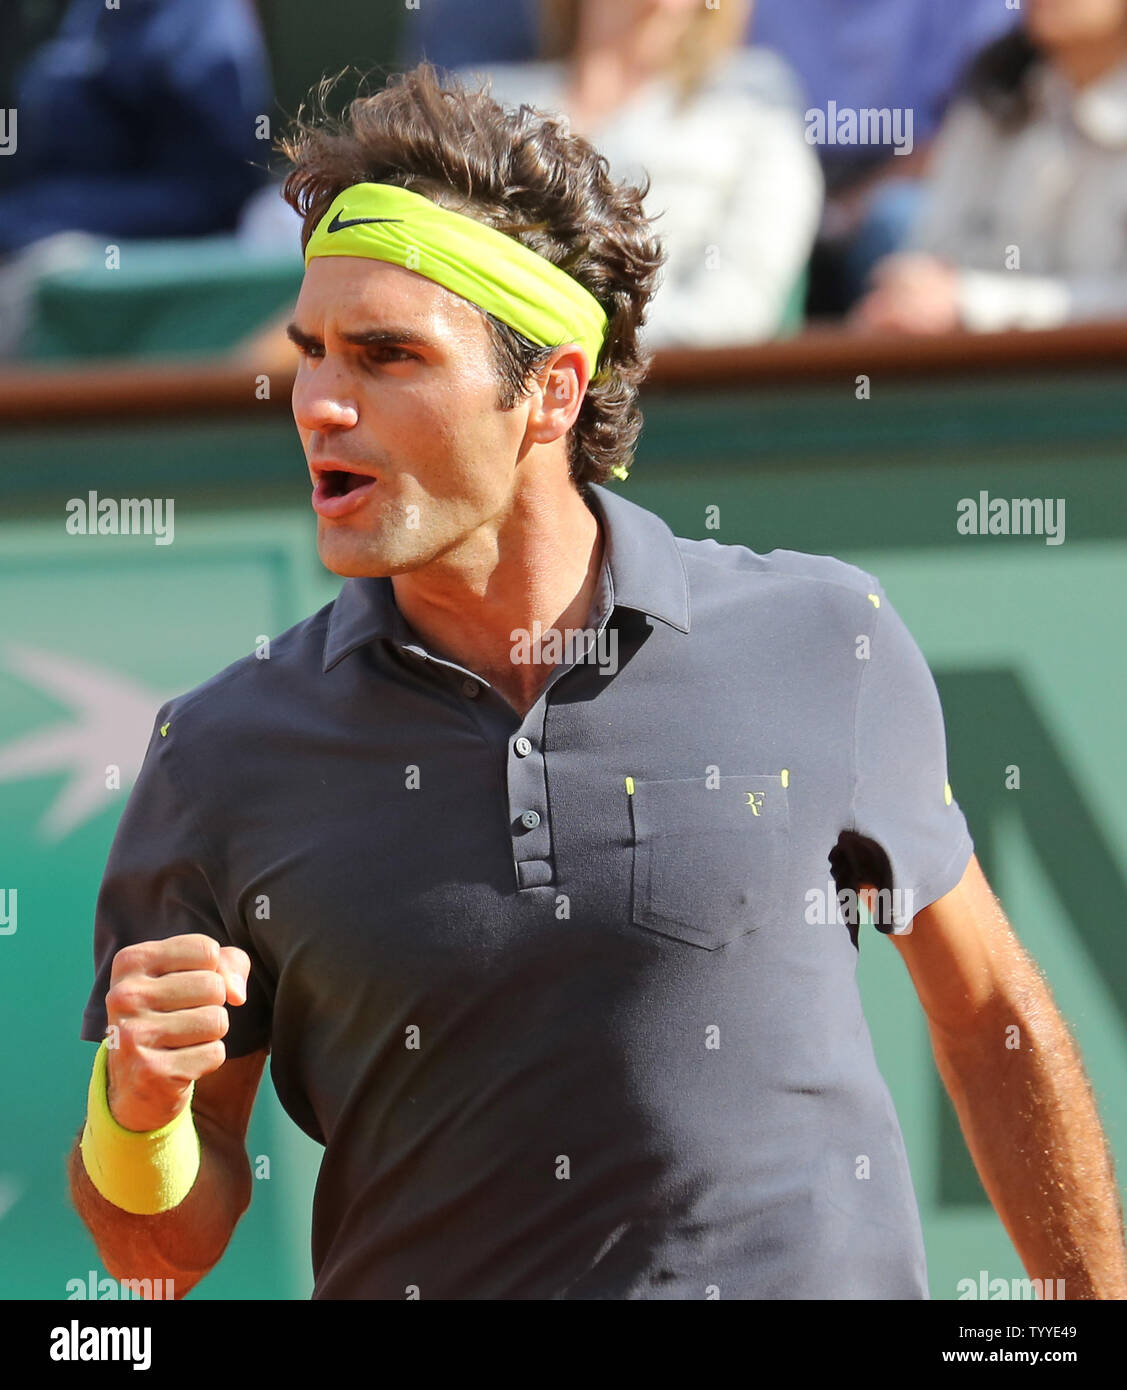 Roger Federer of Switzerland reacts after a shot during his French Open  men's semifinal match against Serbian Novak Djokovic at Roland Garros in  Paris on June 8, 2012. Djokovic defeated Federer 6-4,